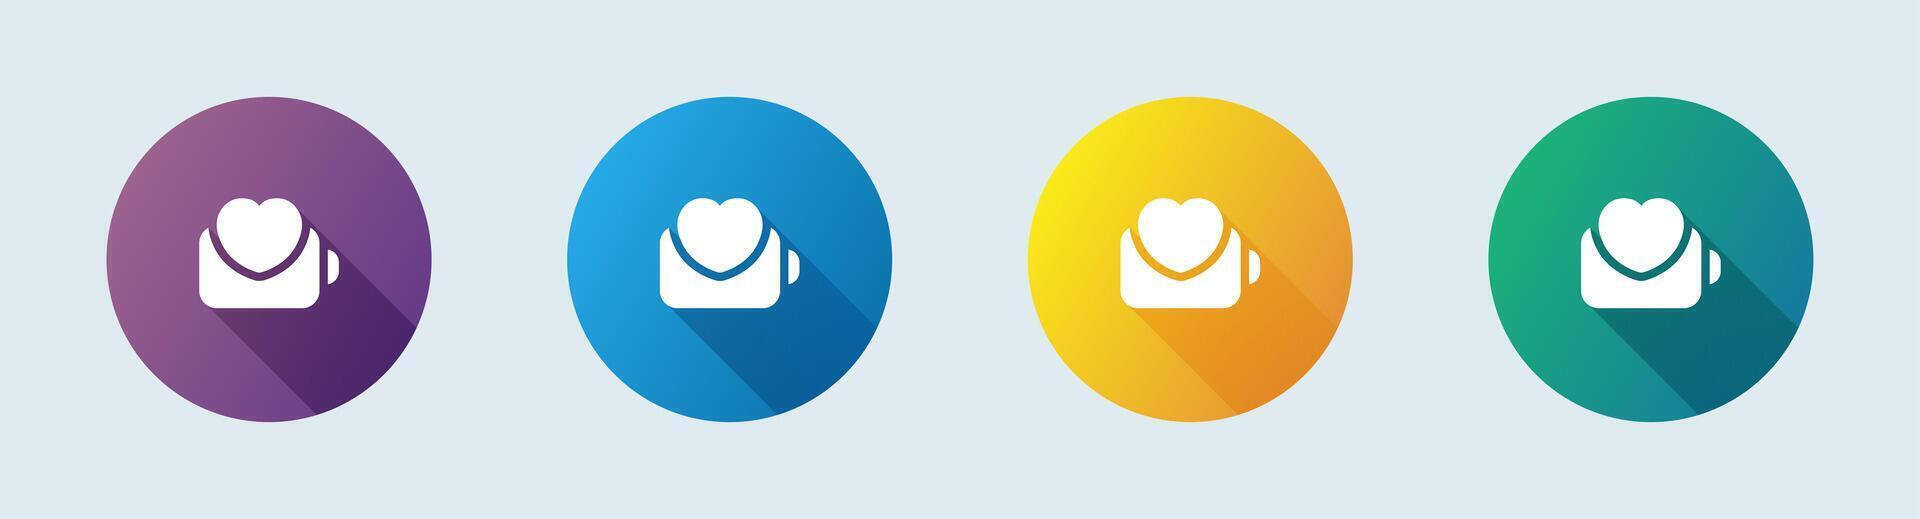 Battery health solid icon in flat design style. Energy signs vector illustration.